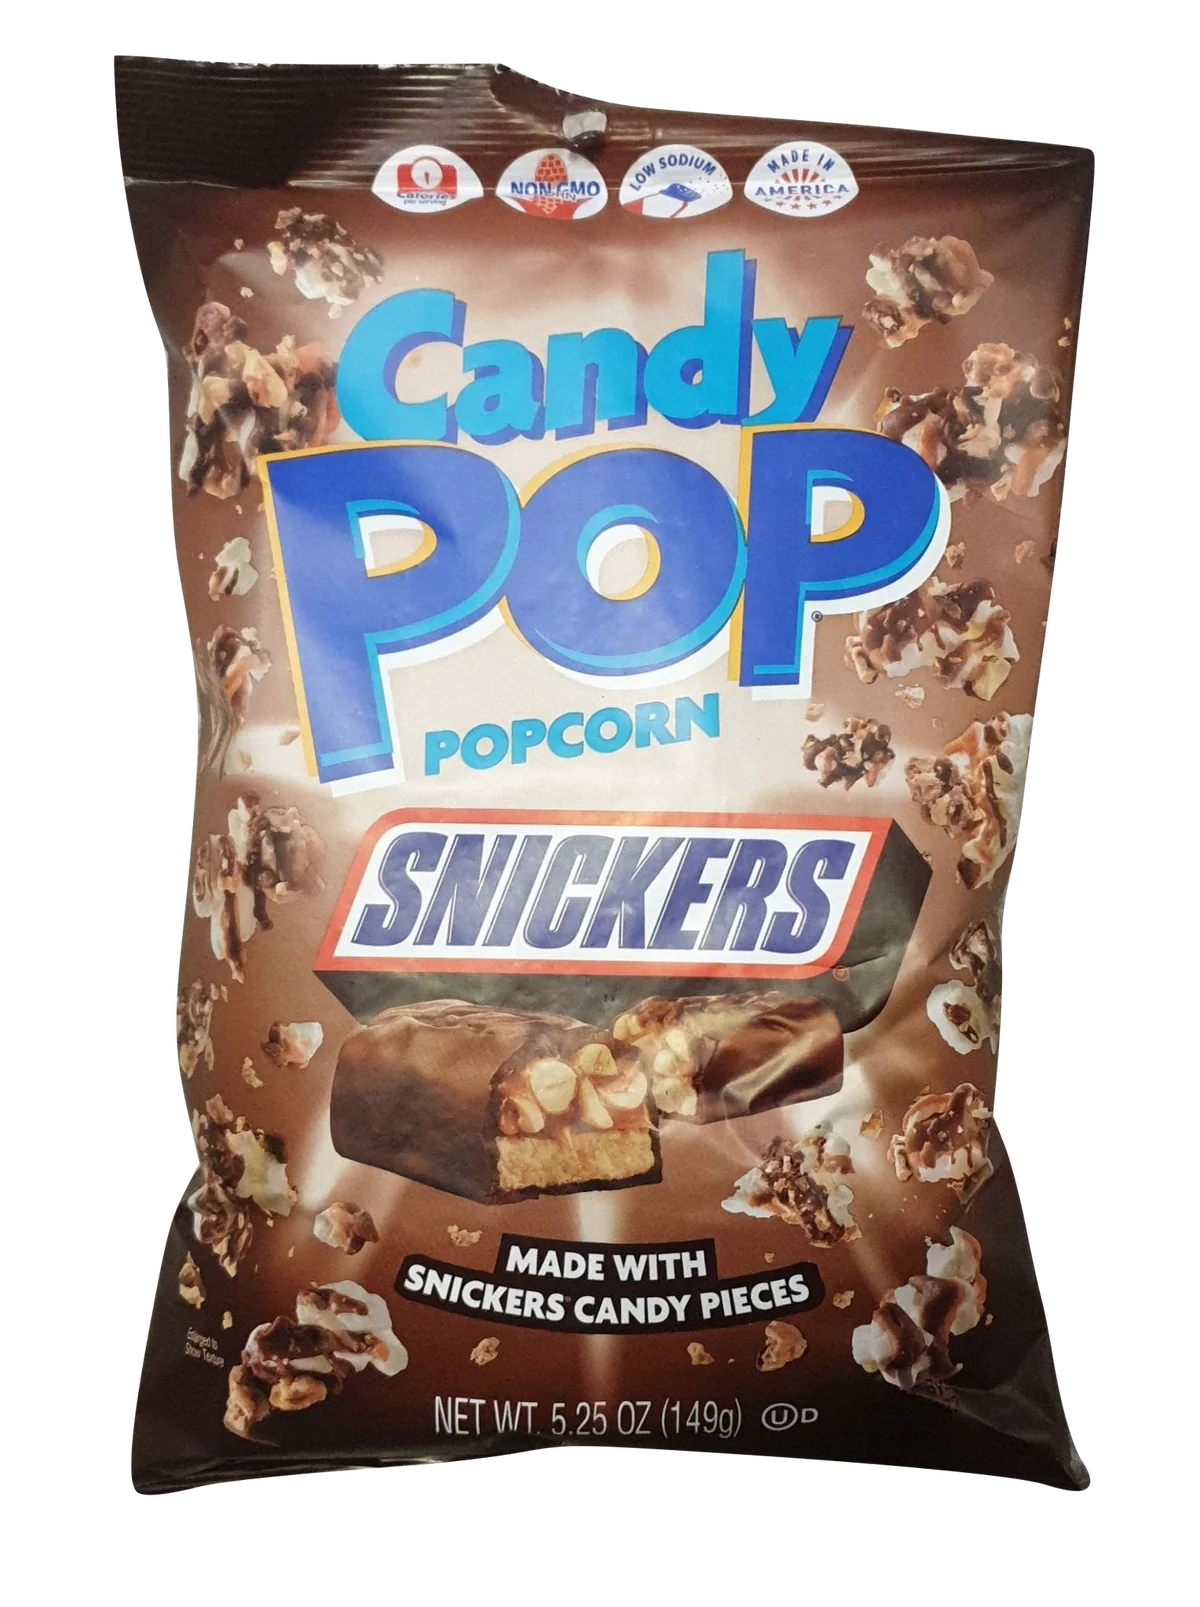 Candy Pop Snickers Popcorn 149g